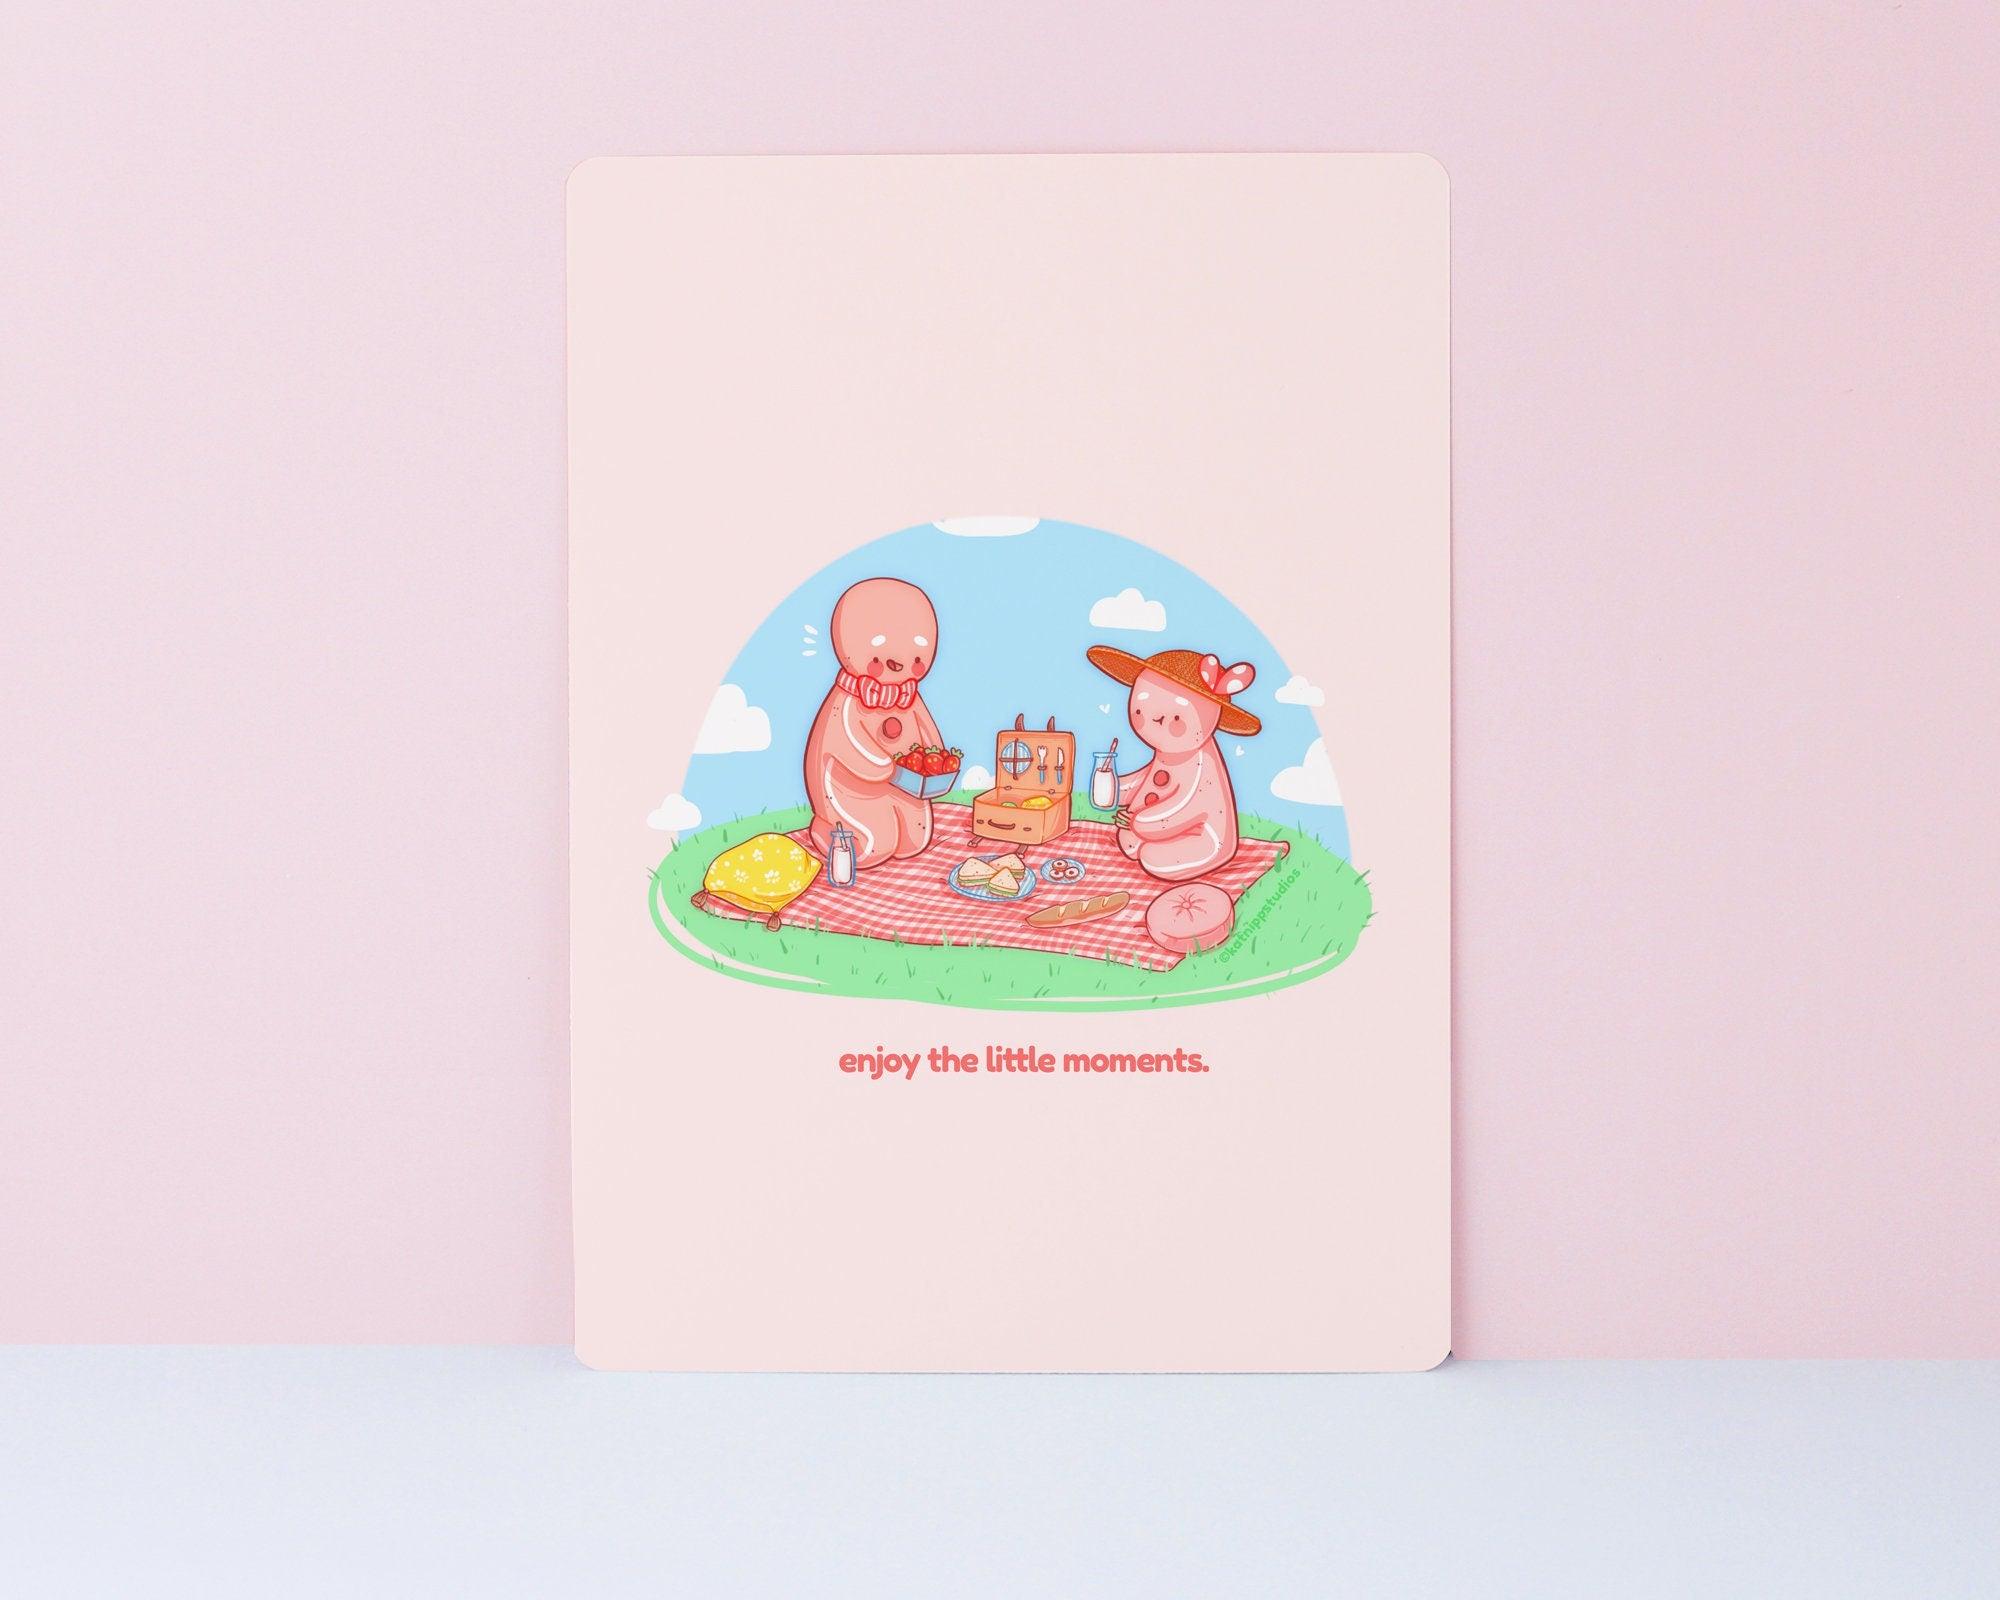 Gingie & Spice Picnic Date ~ Enjoy the little moments - Katnipp Illustrations